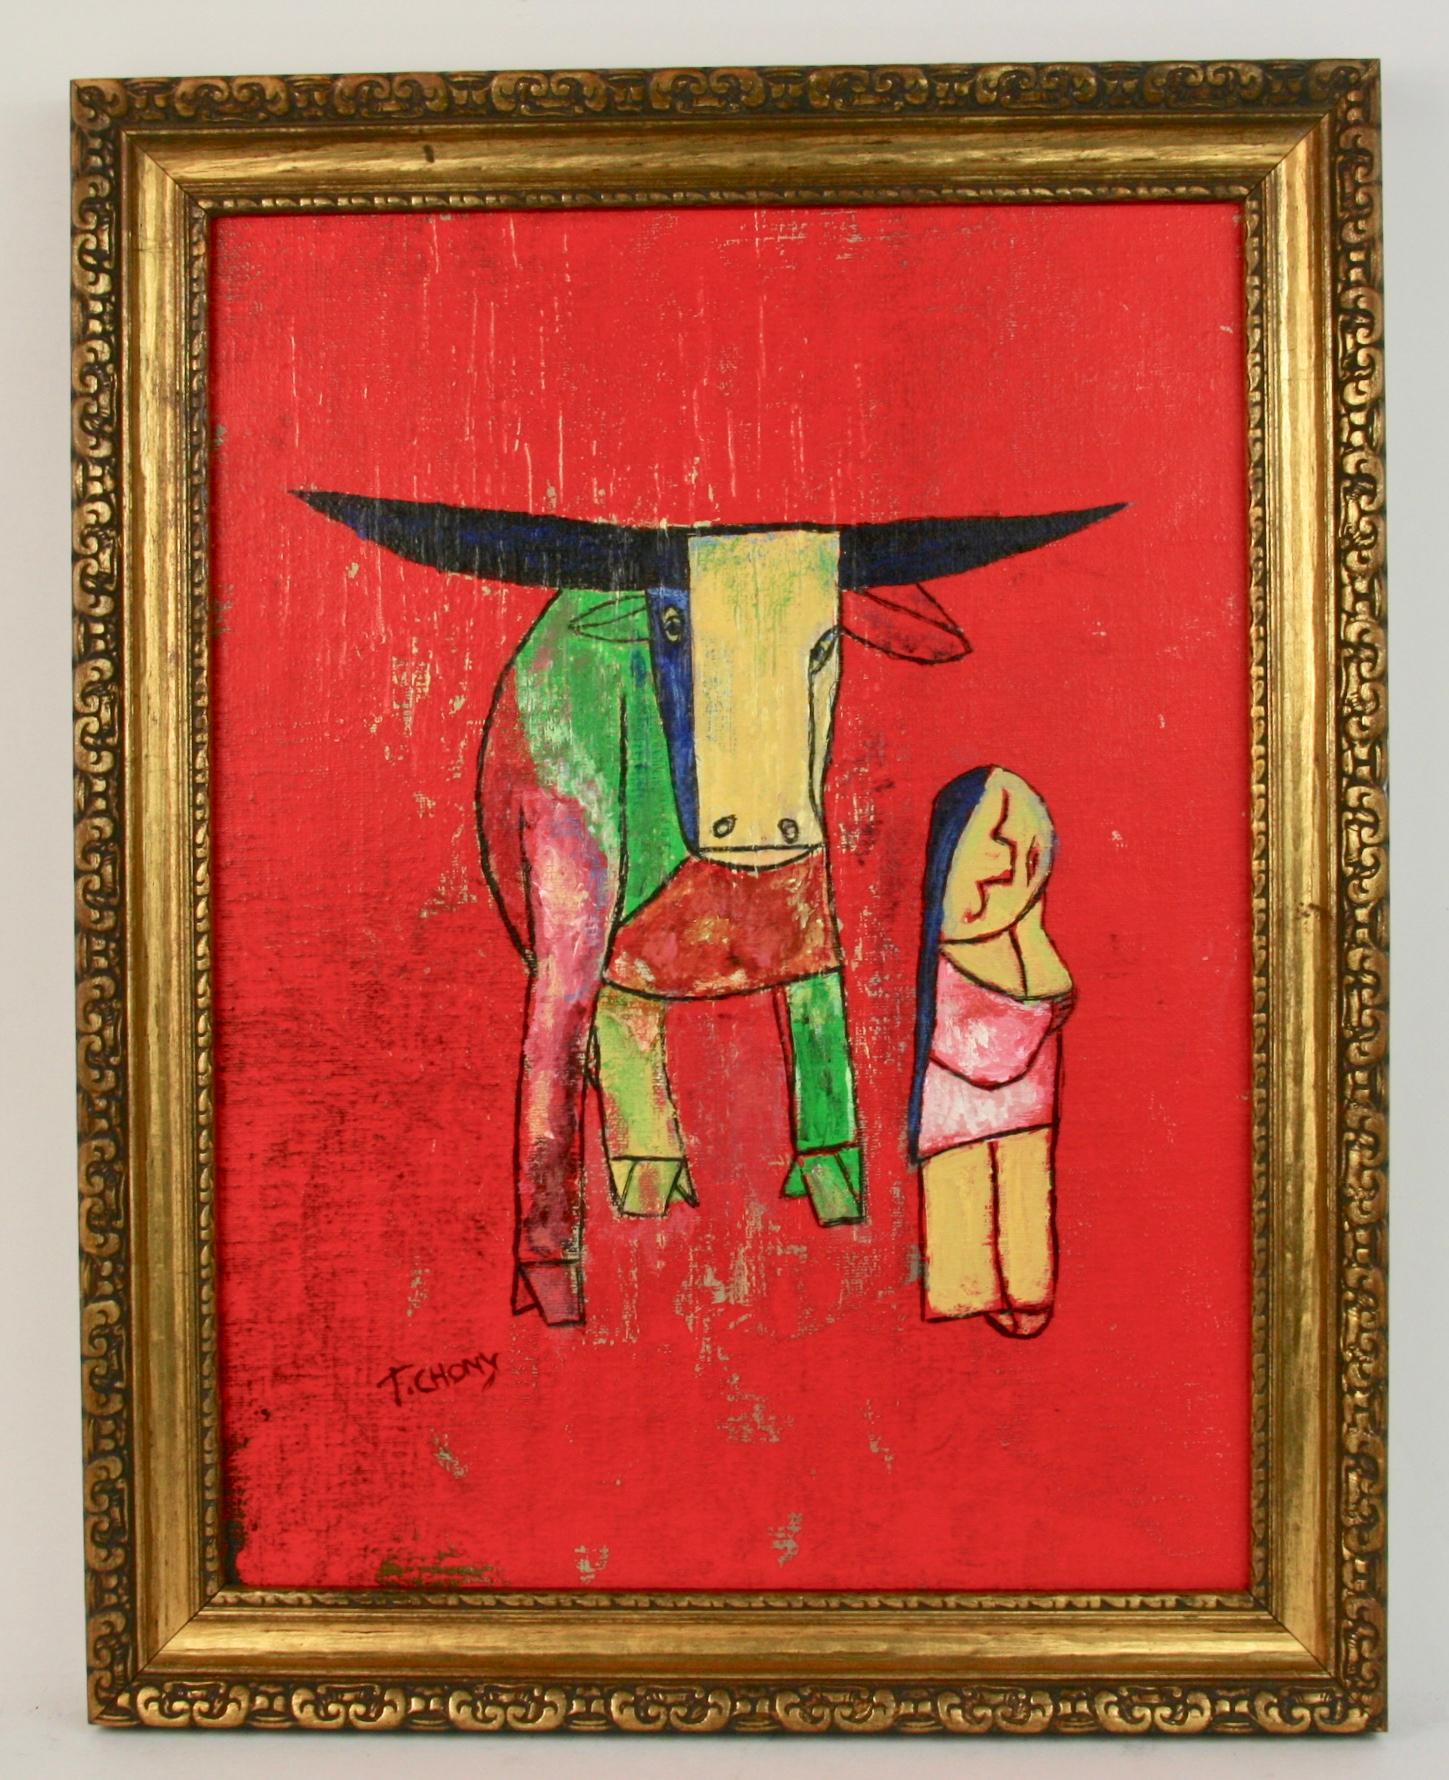 T.Chony Abstract Painting - Surreal Child With Buffalo